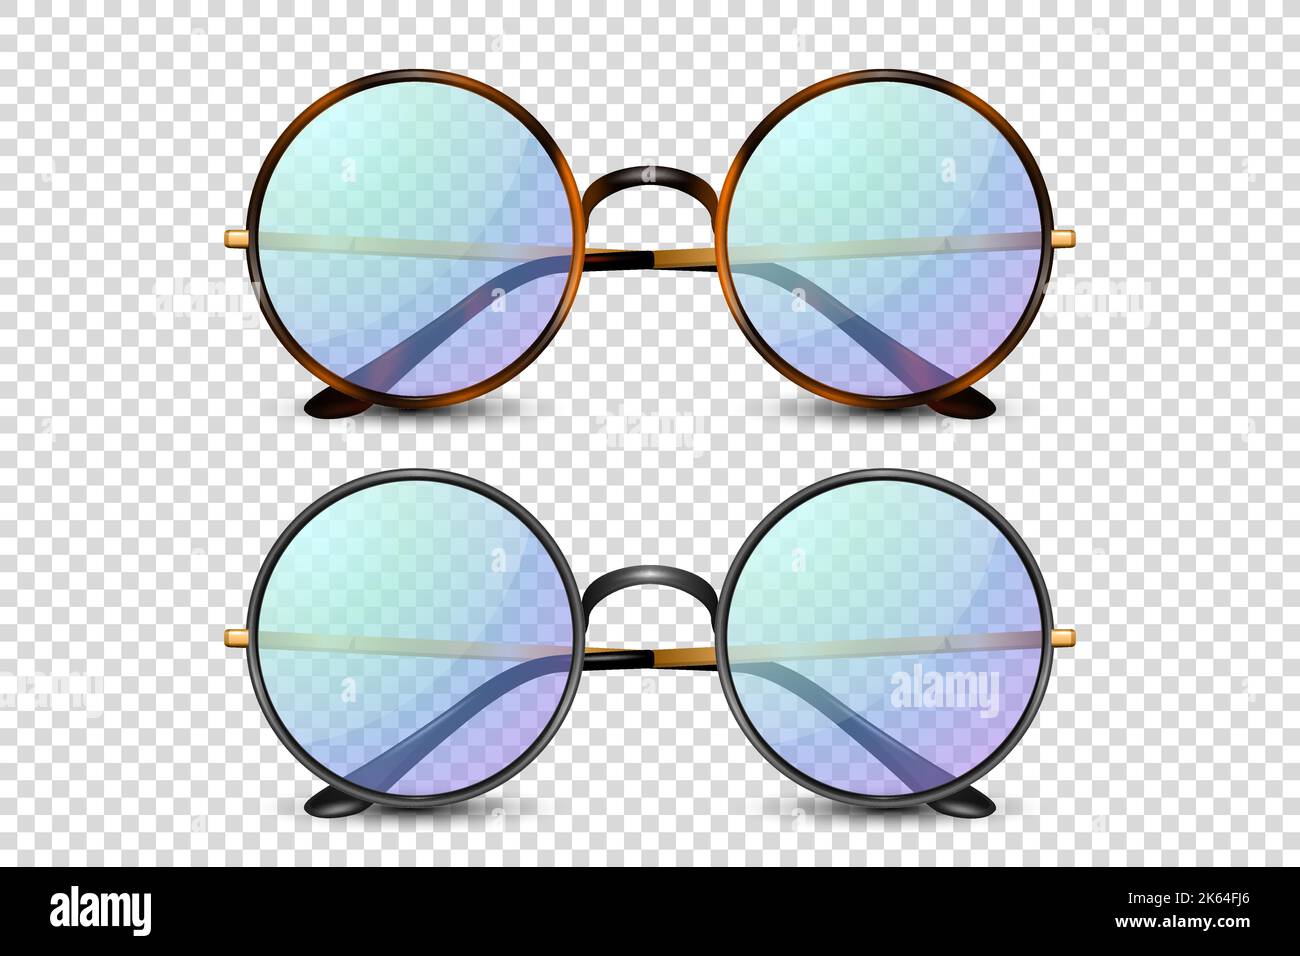 Vector 3d Realistic Leopard, Black Round Frame Glasses Set with Blue, Purple Transparent Glass Isolated, Eyeglasses for Women and Men, Accessory Stock Vector